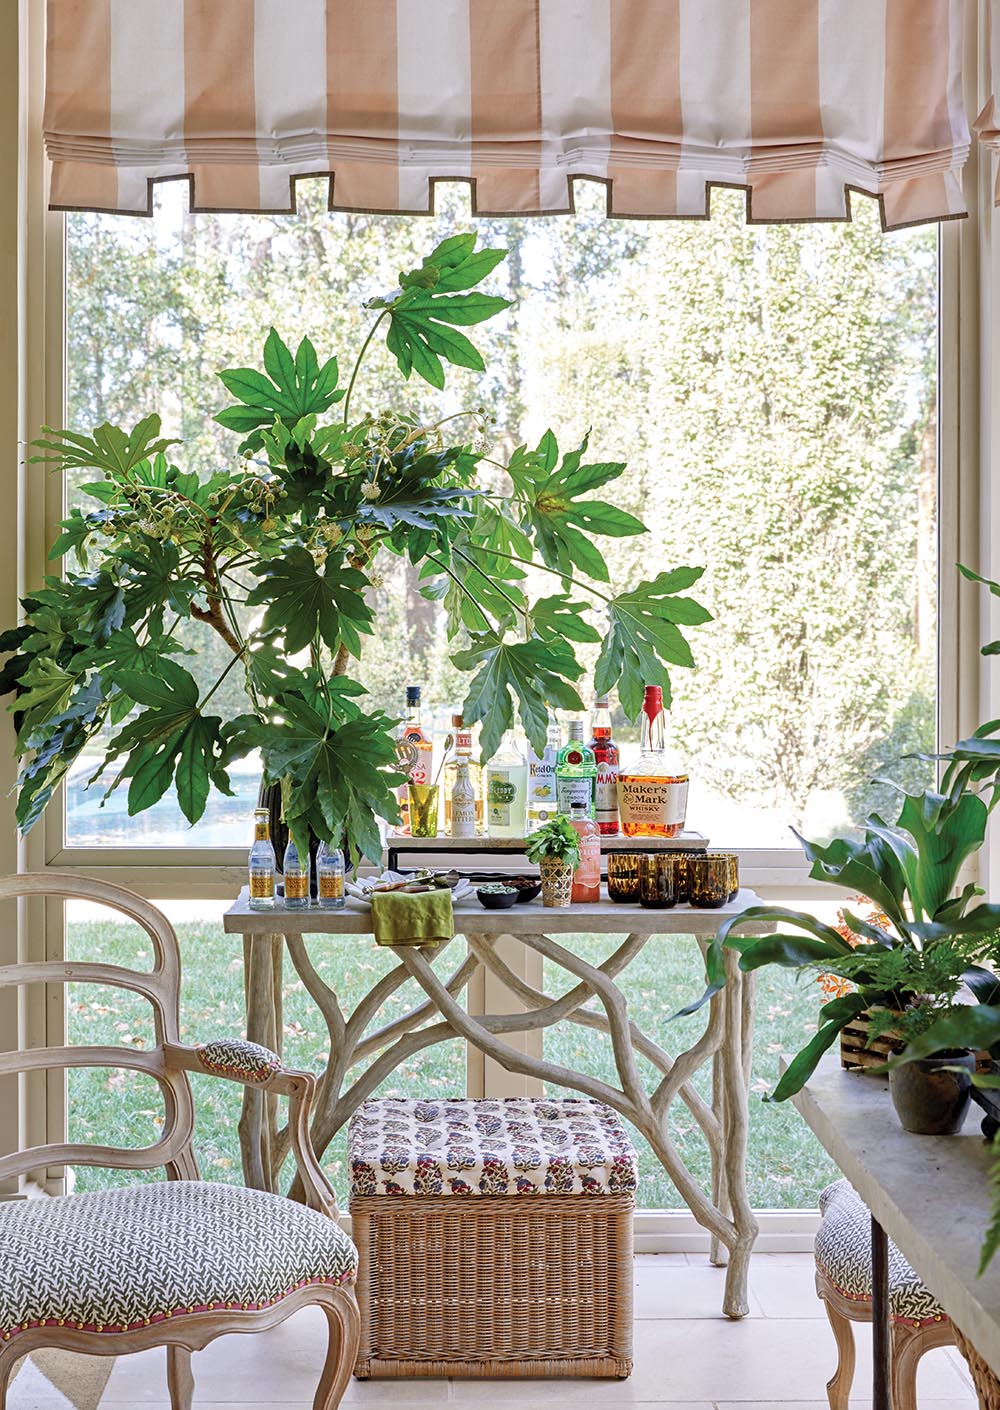 Bar set up on screened porch designed by Ashley Whittaker at the Flower Atlanta Showhouse. Large vase of flowering fatsia branches designed by Keith Robinson.